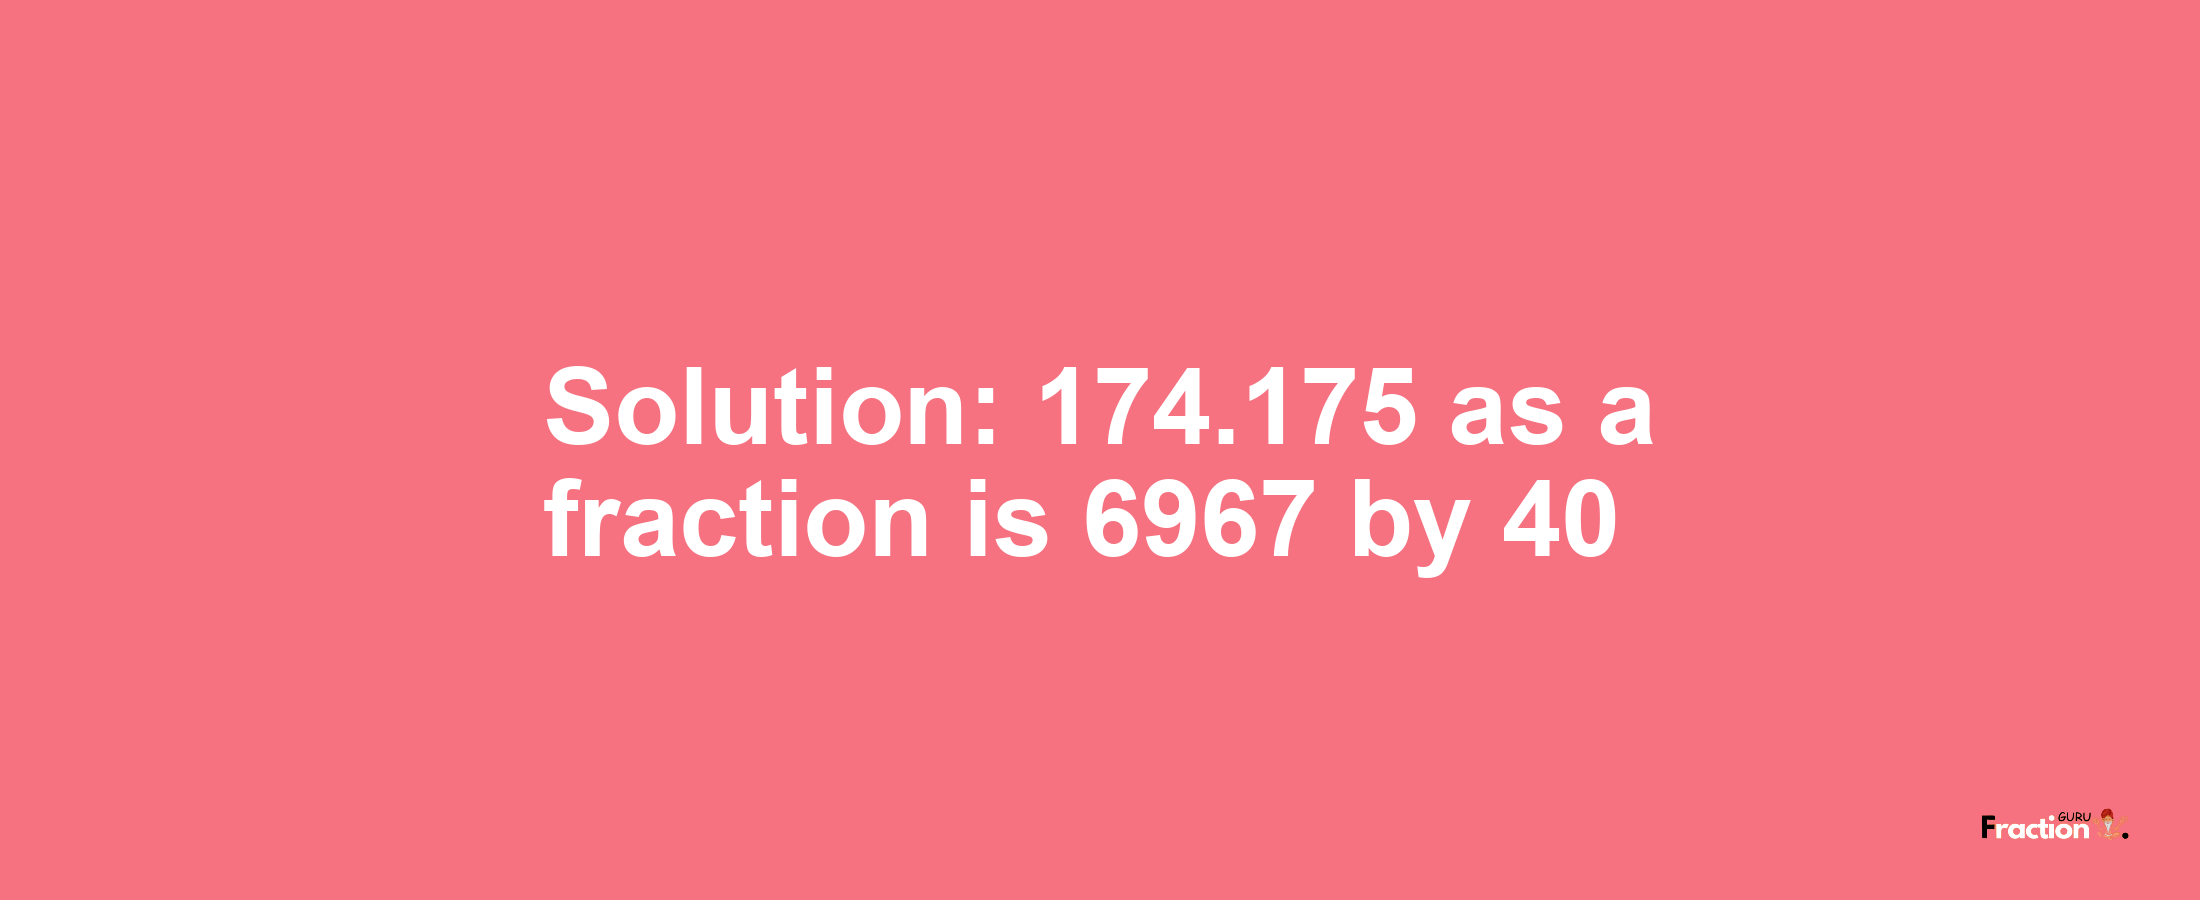 Solution:174.175 as a fraction is 6967/40